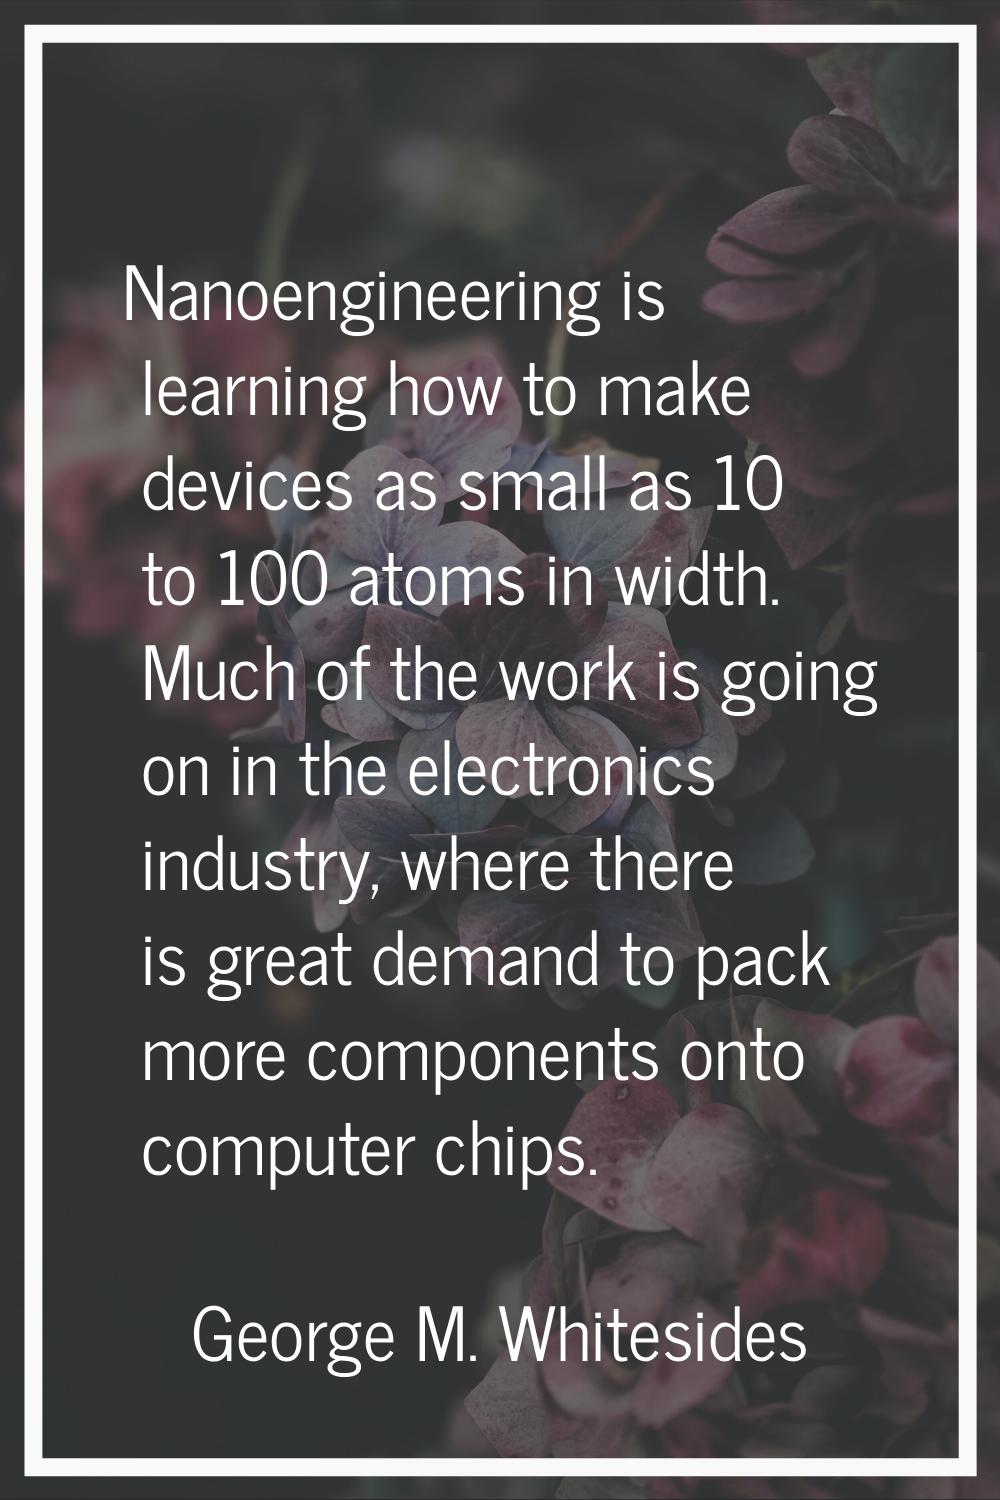 Nanoengineering is learning how to make devices as small as 10 to 100 atoms in width. Much of the w